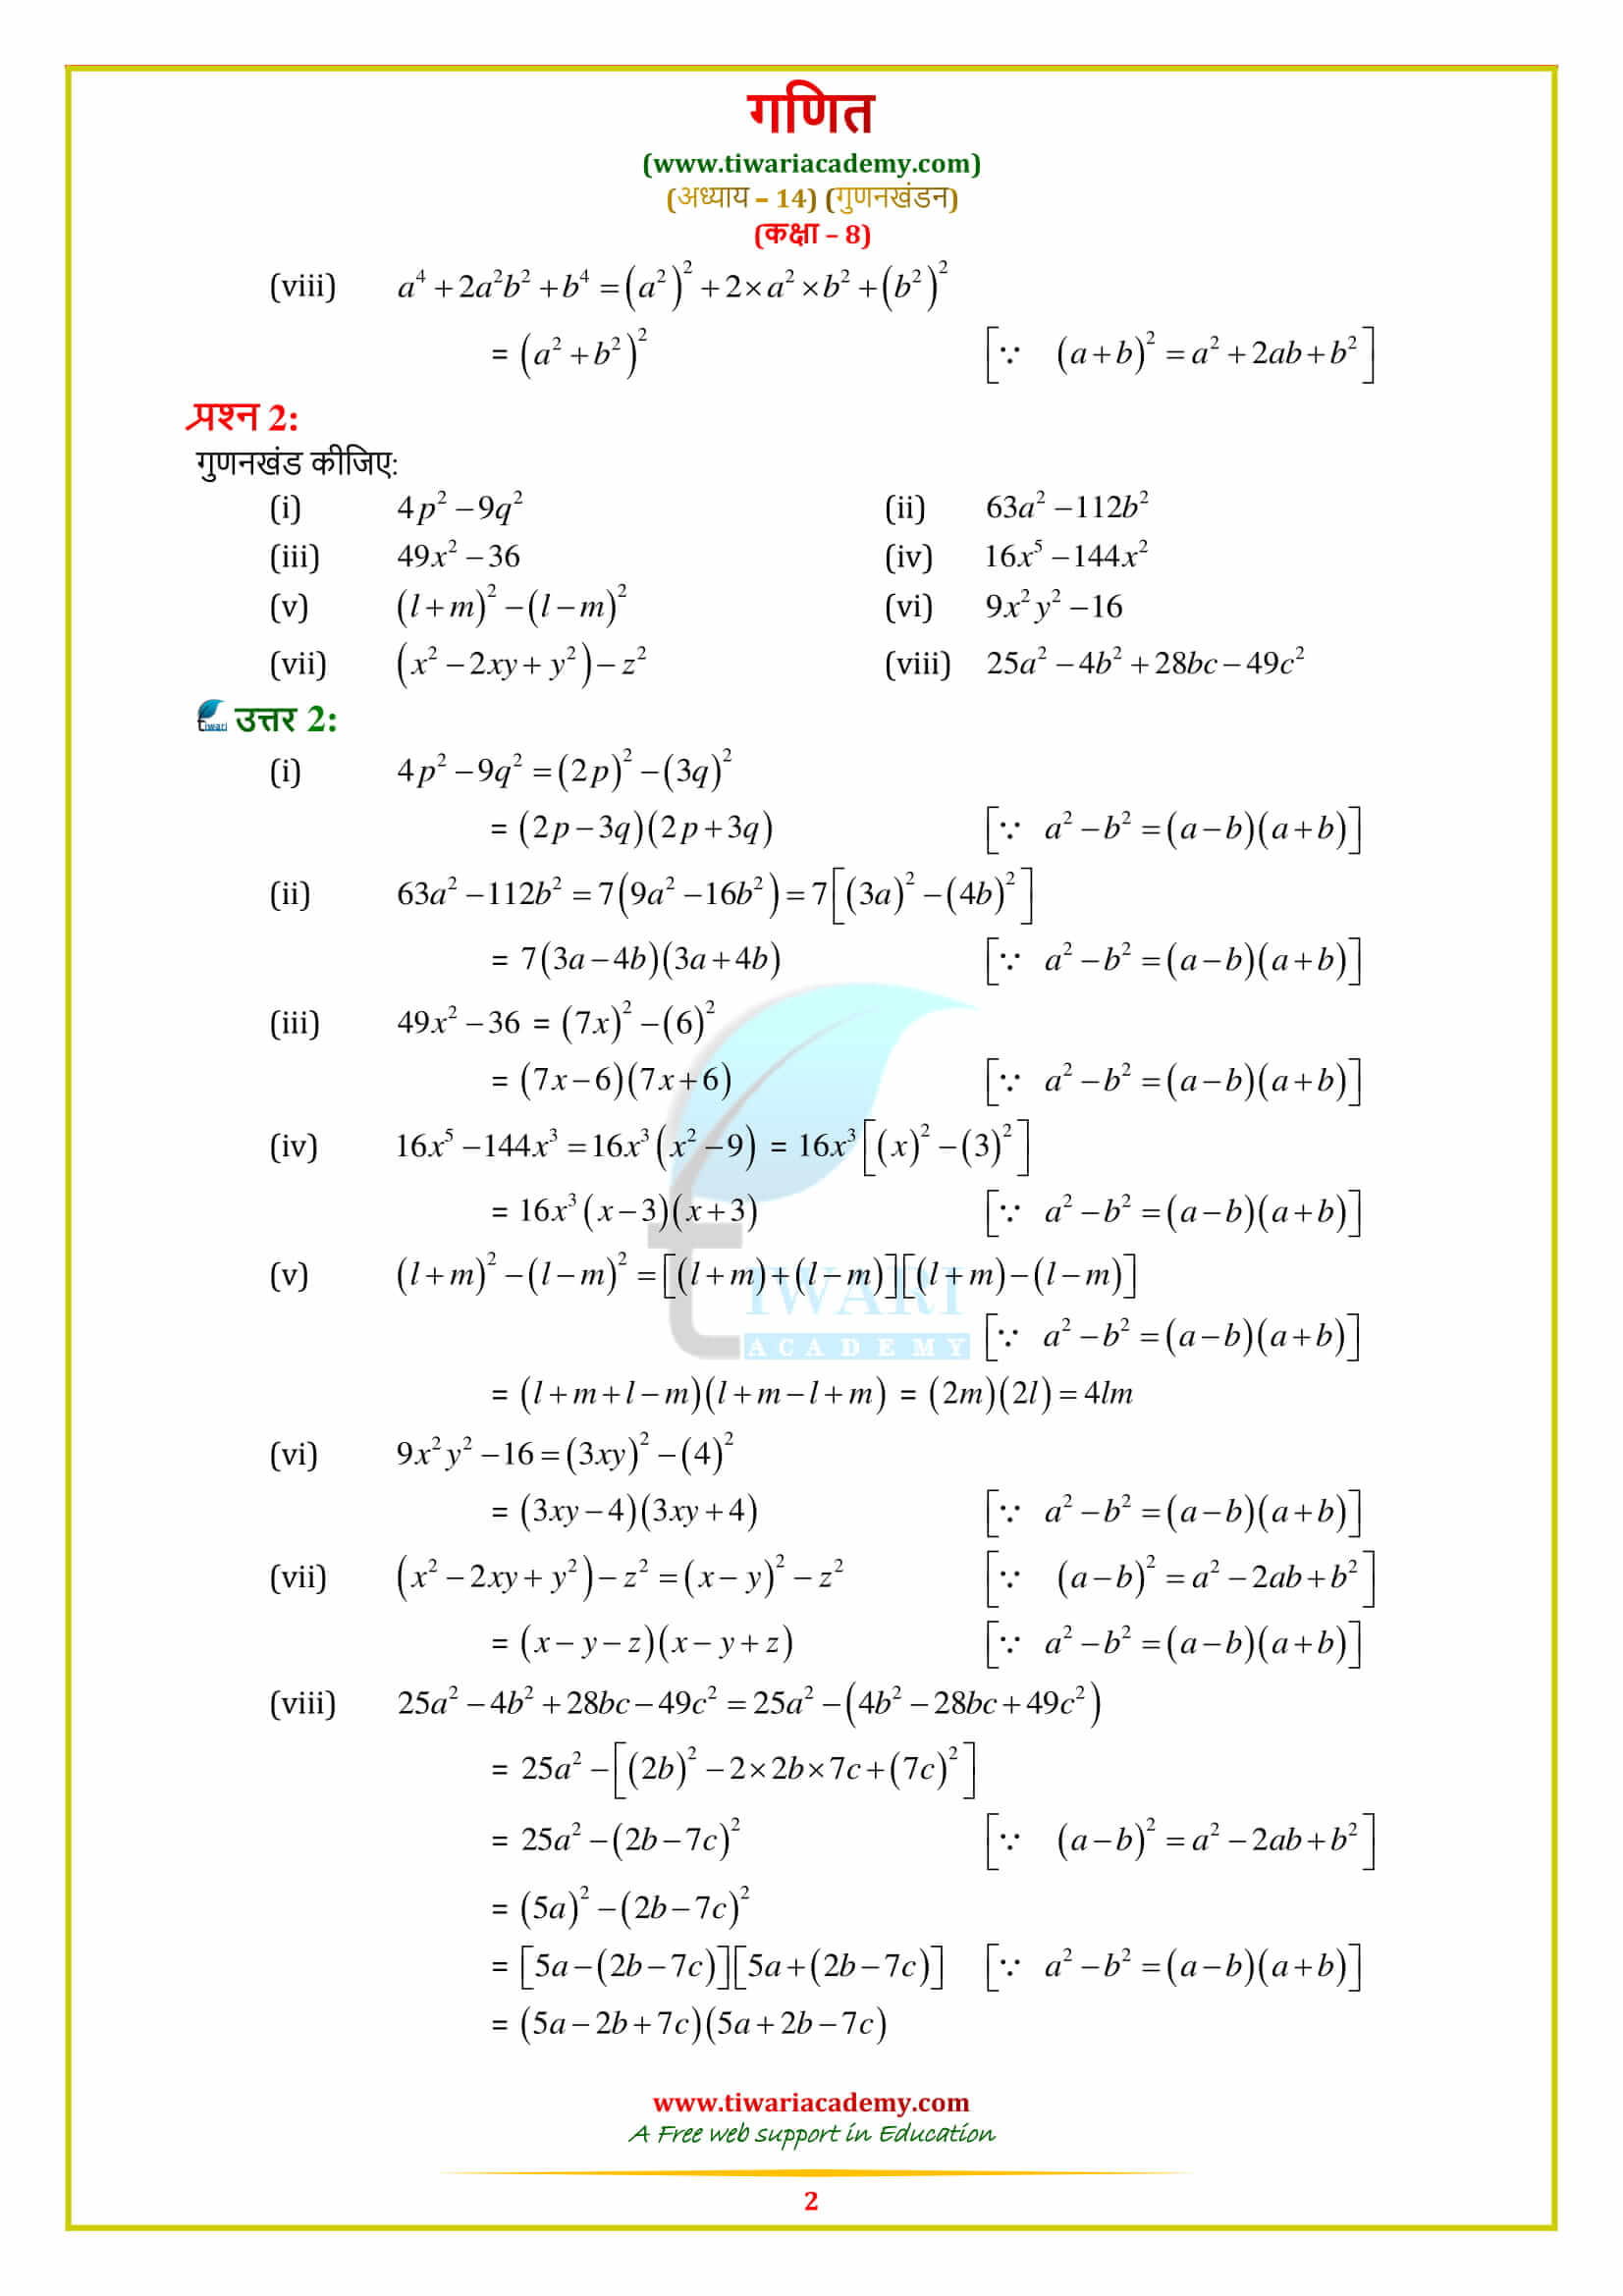 8 Maths Exercise 14.2 solutions in pdf form free